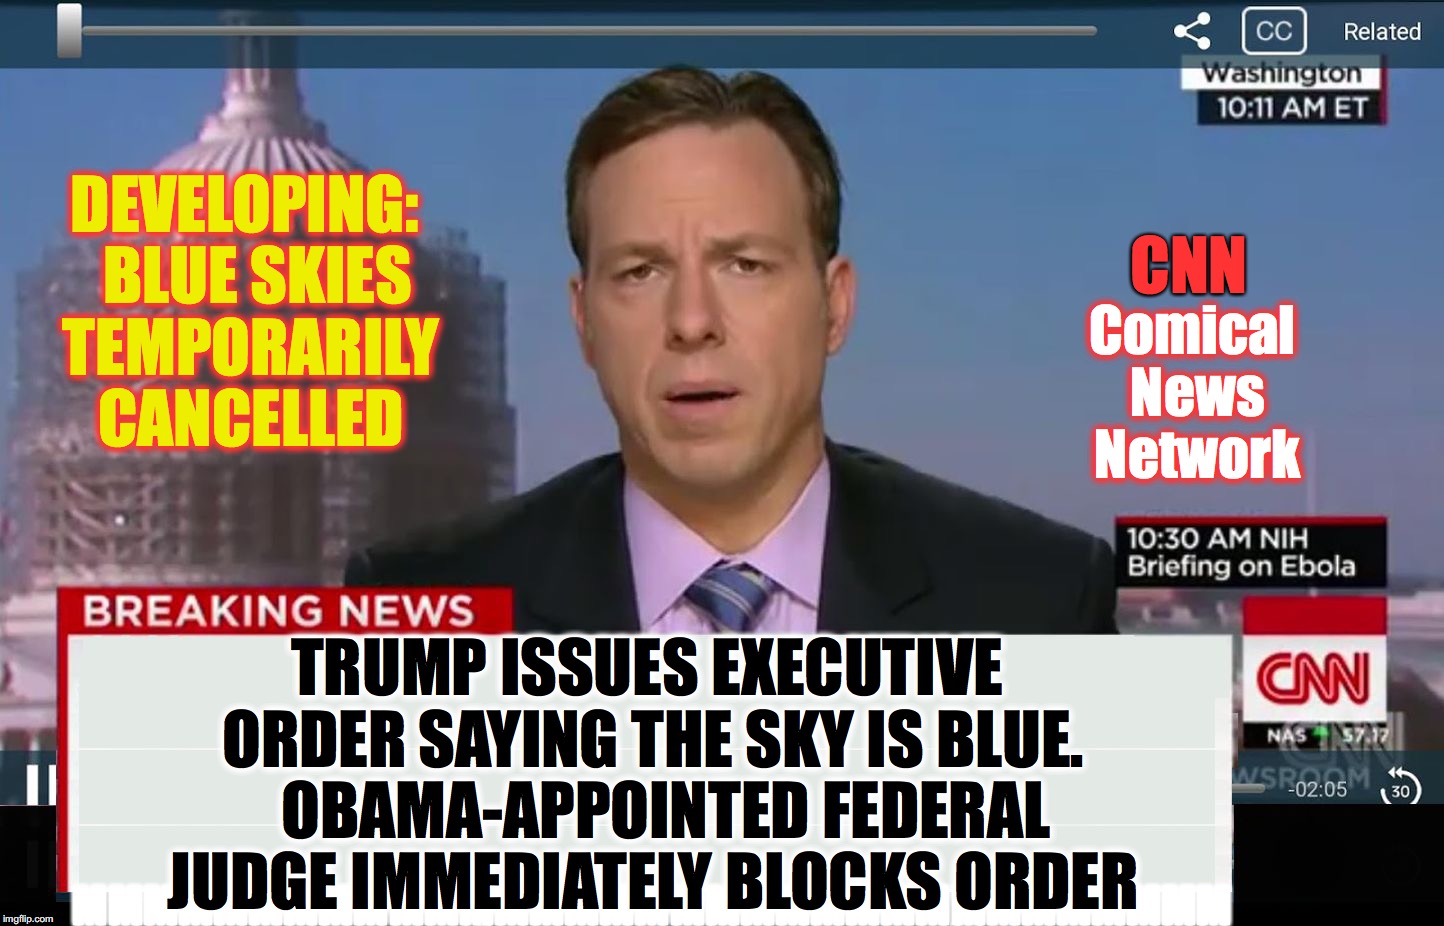 DEVELOPING:  BLUE SKIES TEMPORARILY CANCELLED; CNN; Comical News Network; TRUMP ISSUES EXECUTIVE ORDER SAYING THE SKY IS BLUE.   OBAMA-APPOINTED FEDERAL JUDGE IMMEDIATELY BLOCKS ORDER | image tagged in cnn breaking news,fake news | made w/ Imgflip meme maker